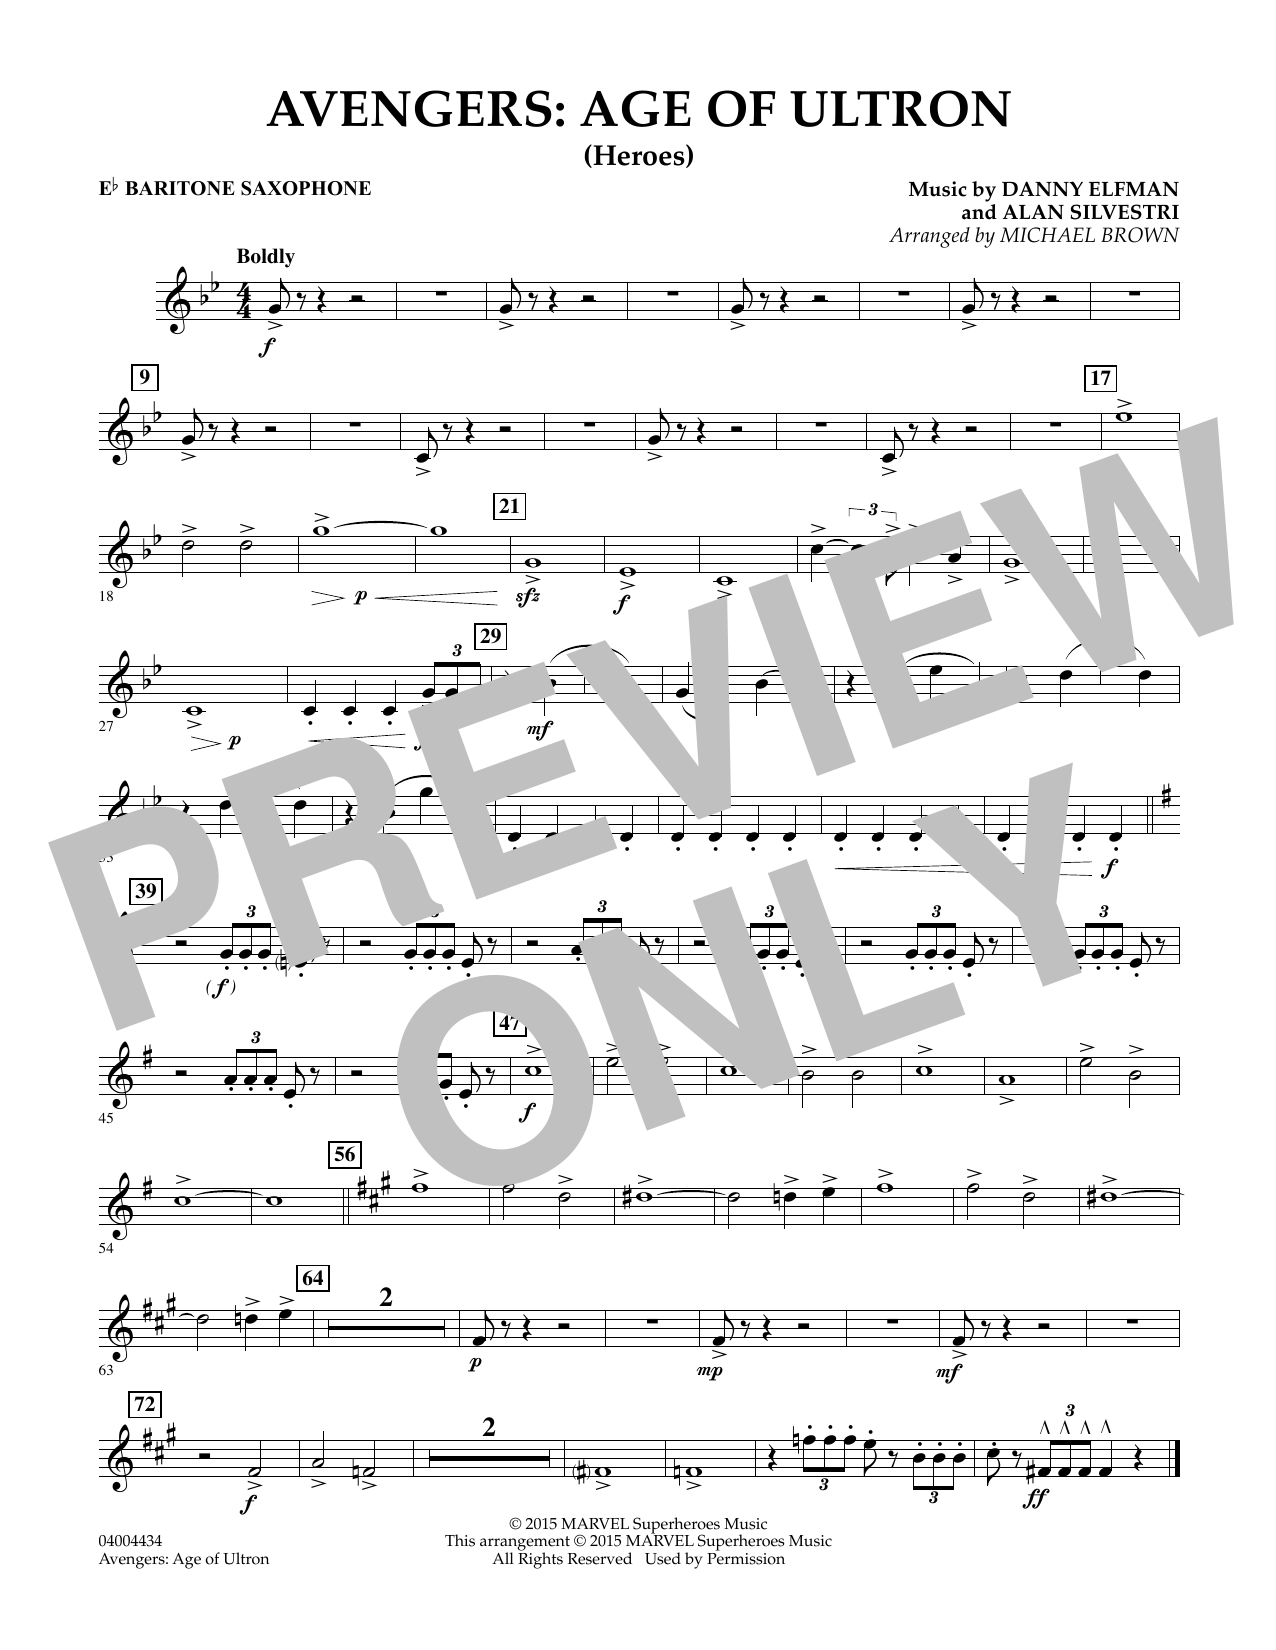 Michael Brown Avengers: The Age of Ultron (Main Theme) - Eb Baritone Saxophone sheet music notes and chords. Download Printable PDF.